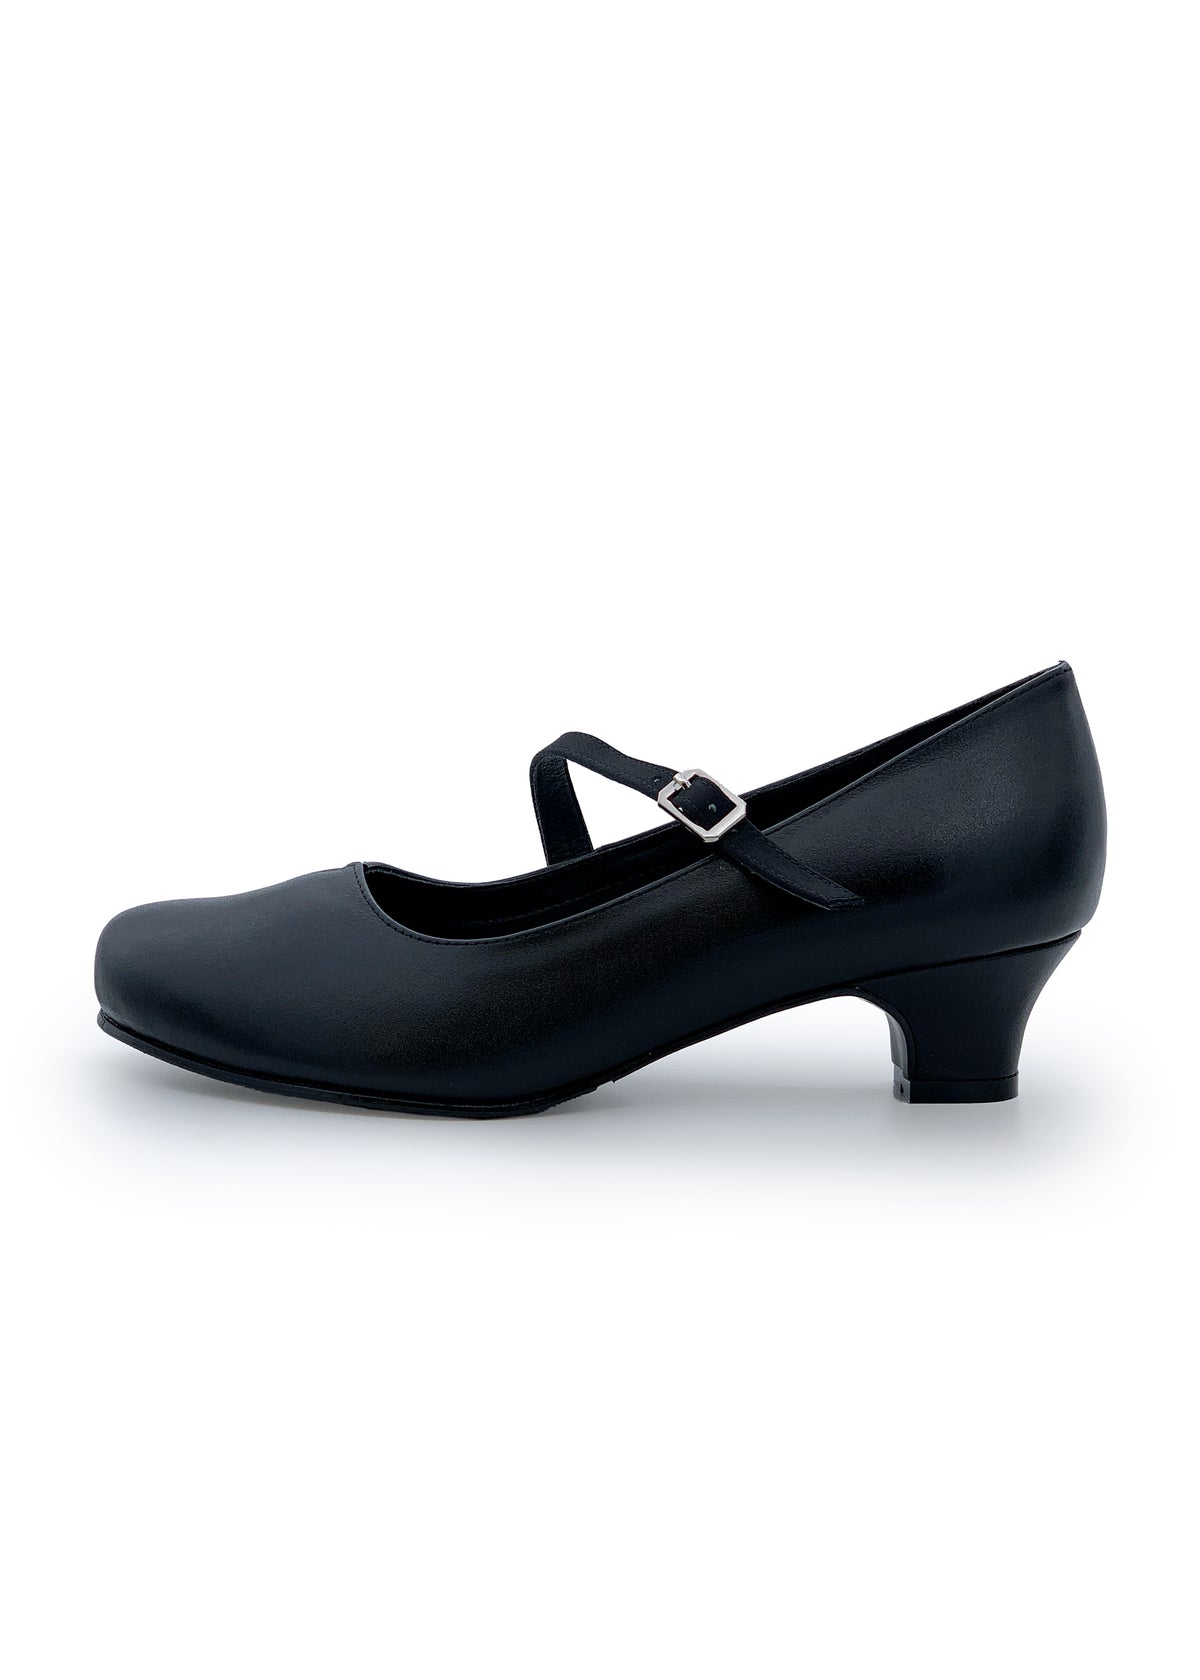 Open-toed shoes with a thin strap - black leather, wide lace